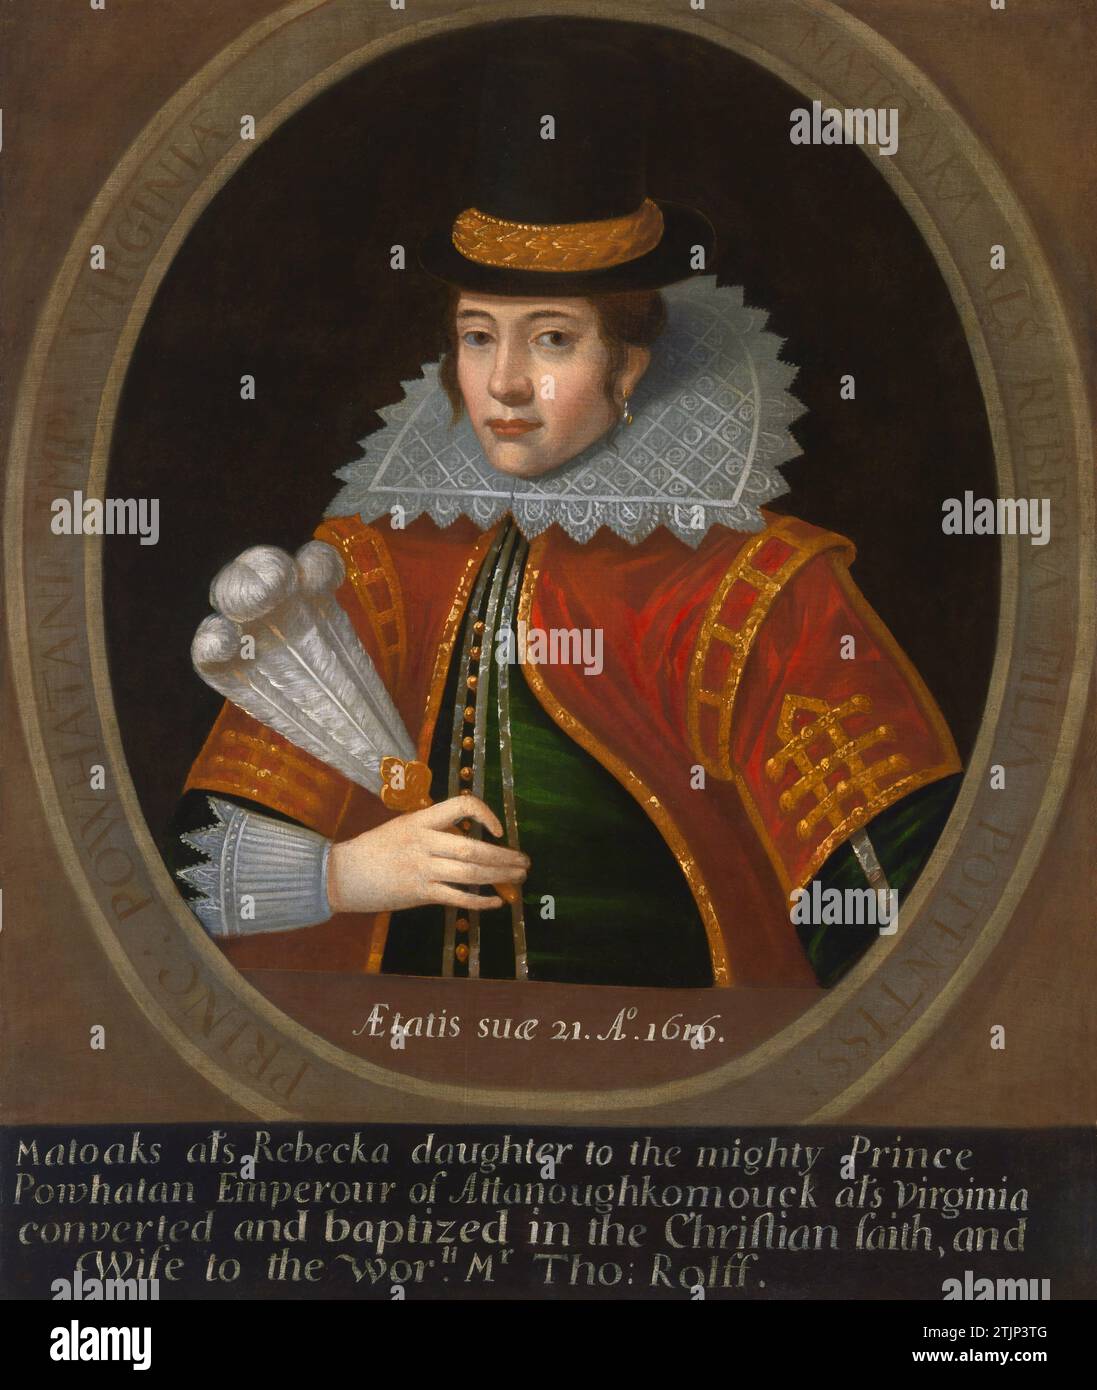 Portrait of Pocahontas, c.1595-1617 by an Uunidentified Artist / copy after Simon van de Passe. Born in present-day coastal Virginia, Matoaka, also known as Pocahontas, grew up among Algonquian-speaking Powhatan people overseen by her father. In 1613 an English sea captain kidnapped and ransomed her for corn, guns, and prisoners. While in captivity she was converted to Christianity, took the name Rebecca, and married the tobacco farmer John Rolfe.    An optimised version of an image of a painting in the National Portrait Gallery/Smithsonian. Stock Photo